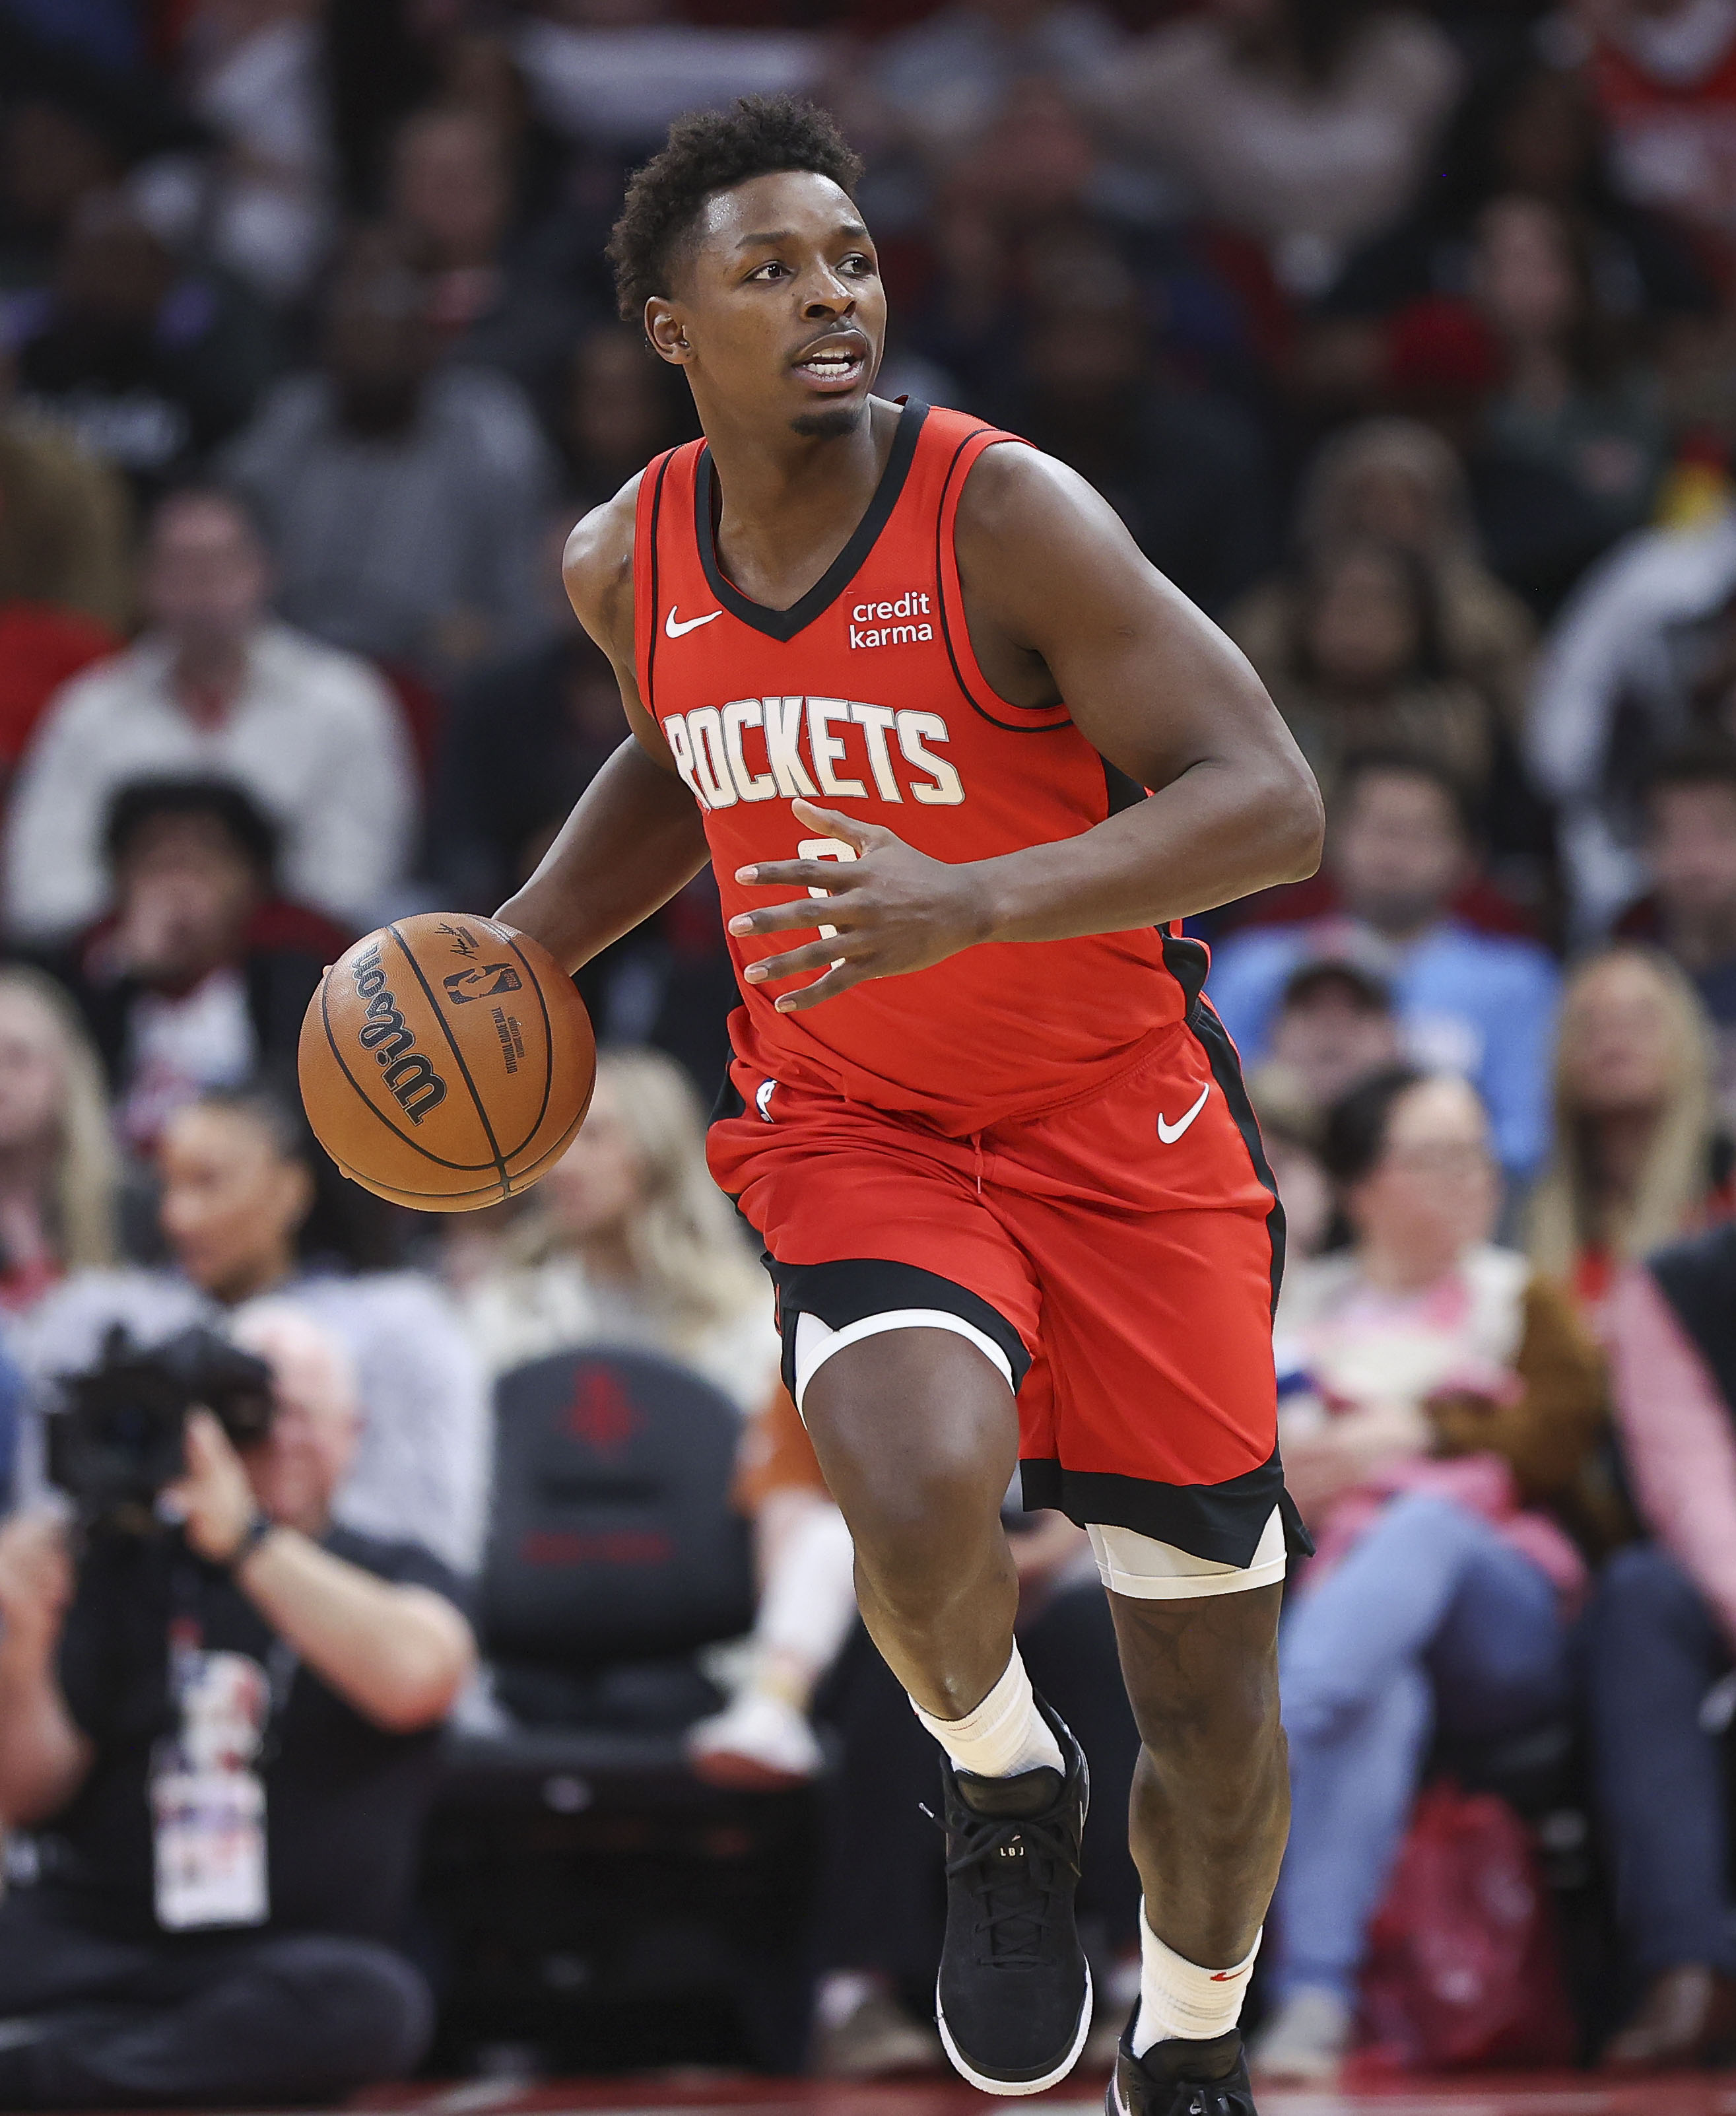 Pistons start strong but Rockets' offense takes over for win | Reuters